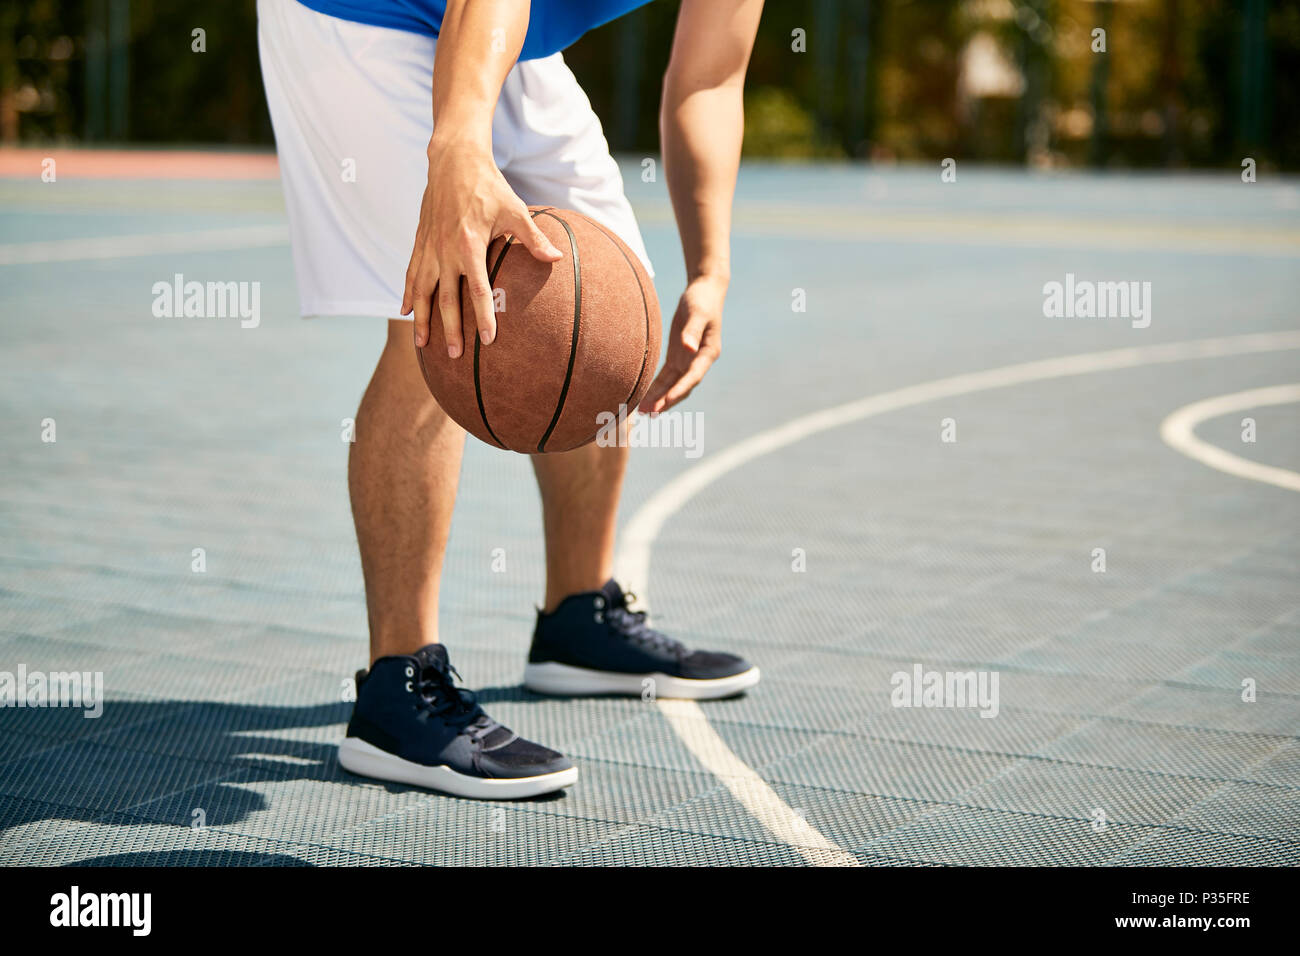 young asian male basketball player dribbling and practicing ball handling skill on court. Stock Photo